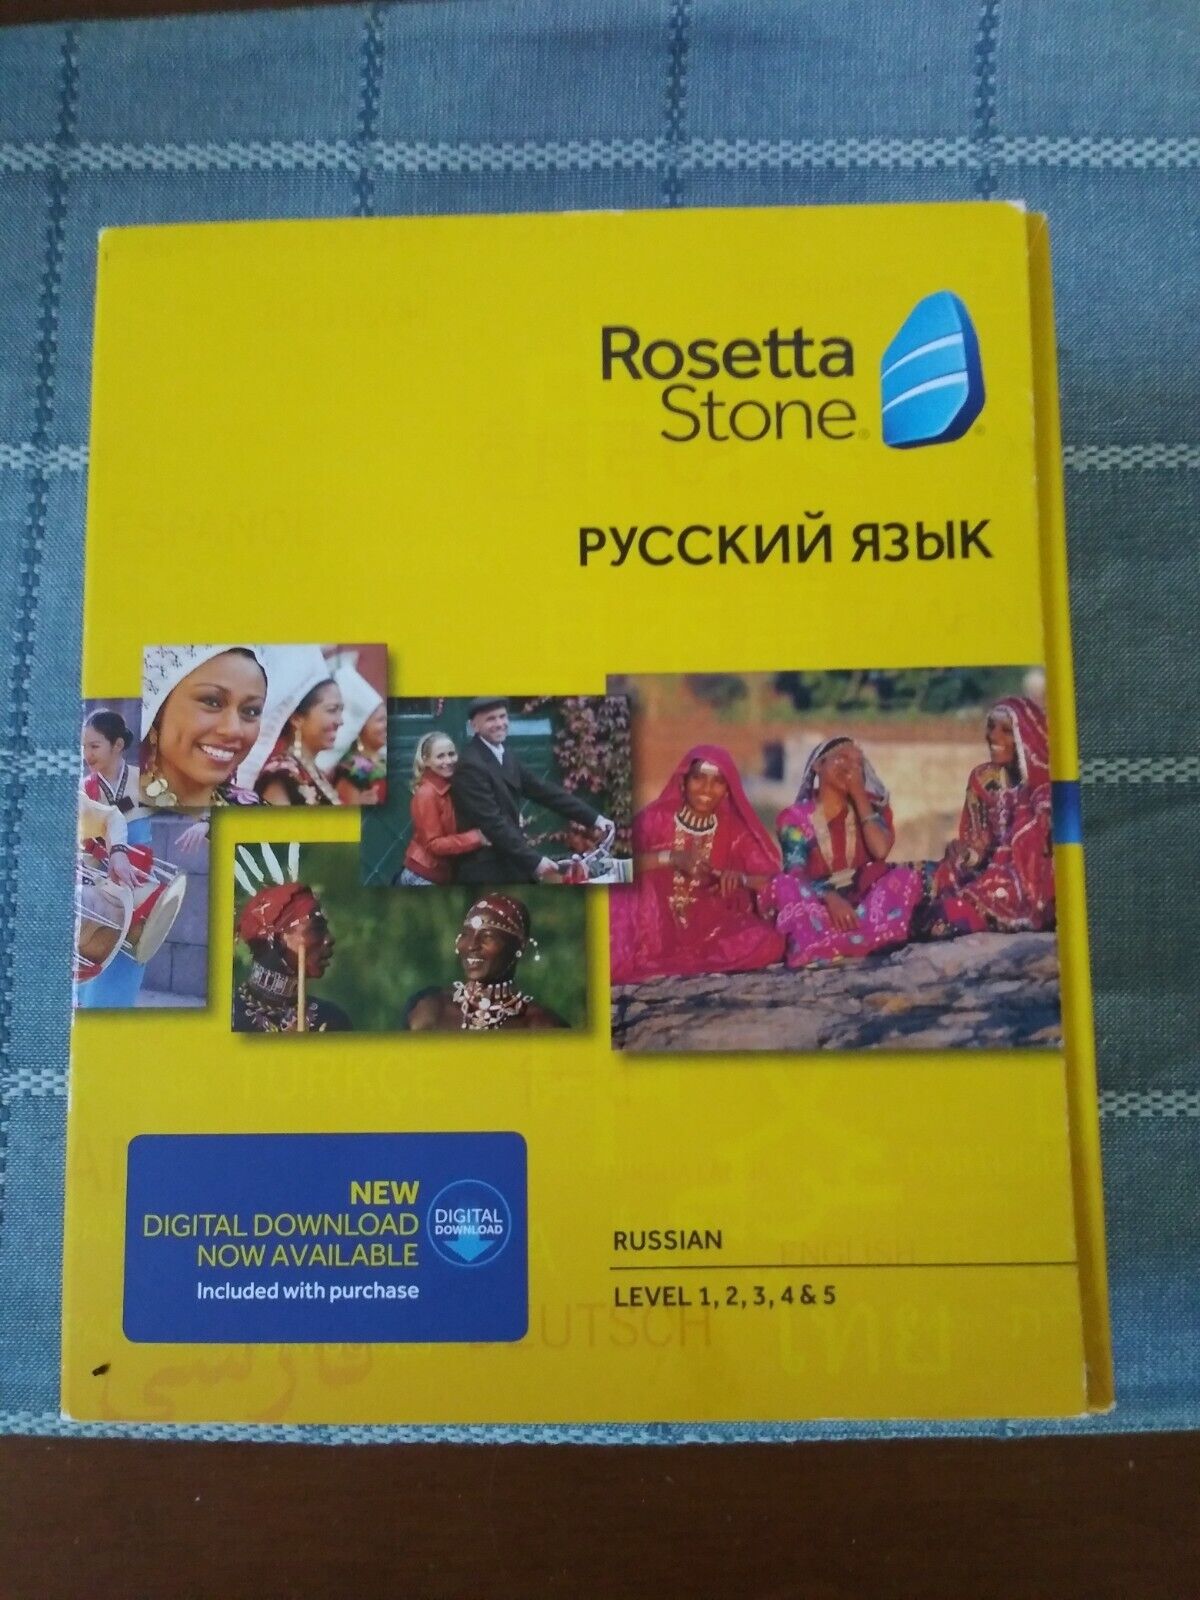 Rosetta Stone Russian Levels 1-5 with Activation Code Open Box, New. Version 4